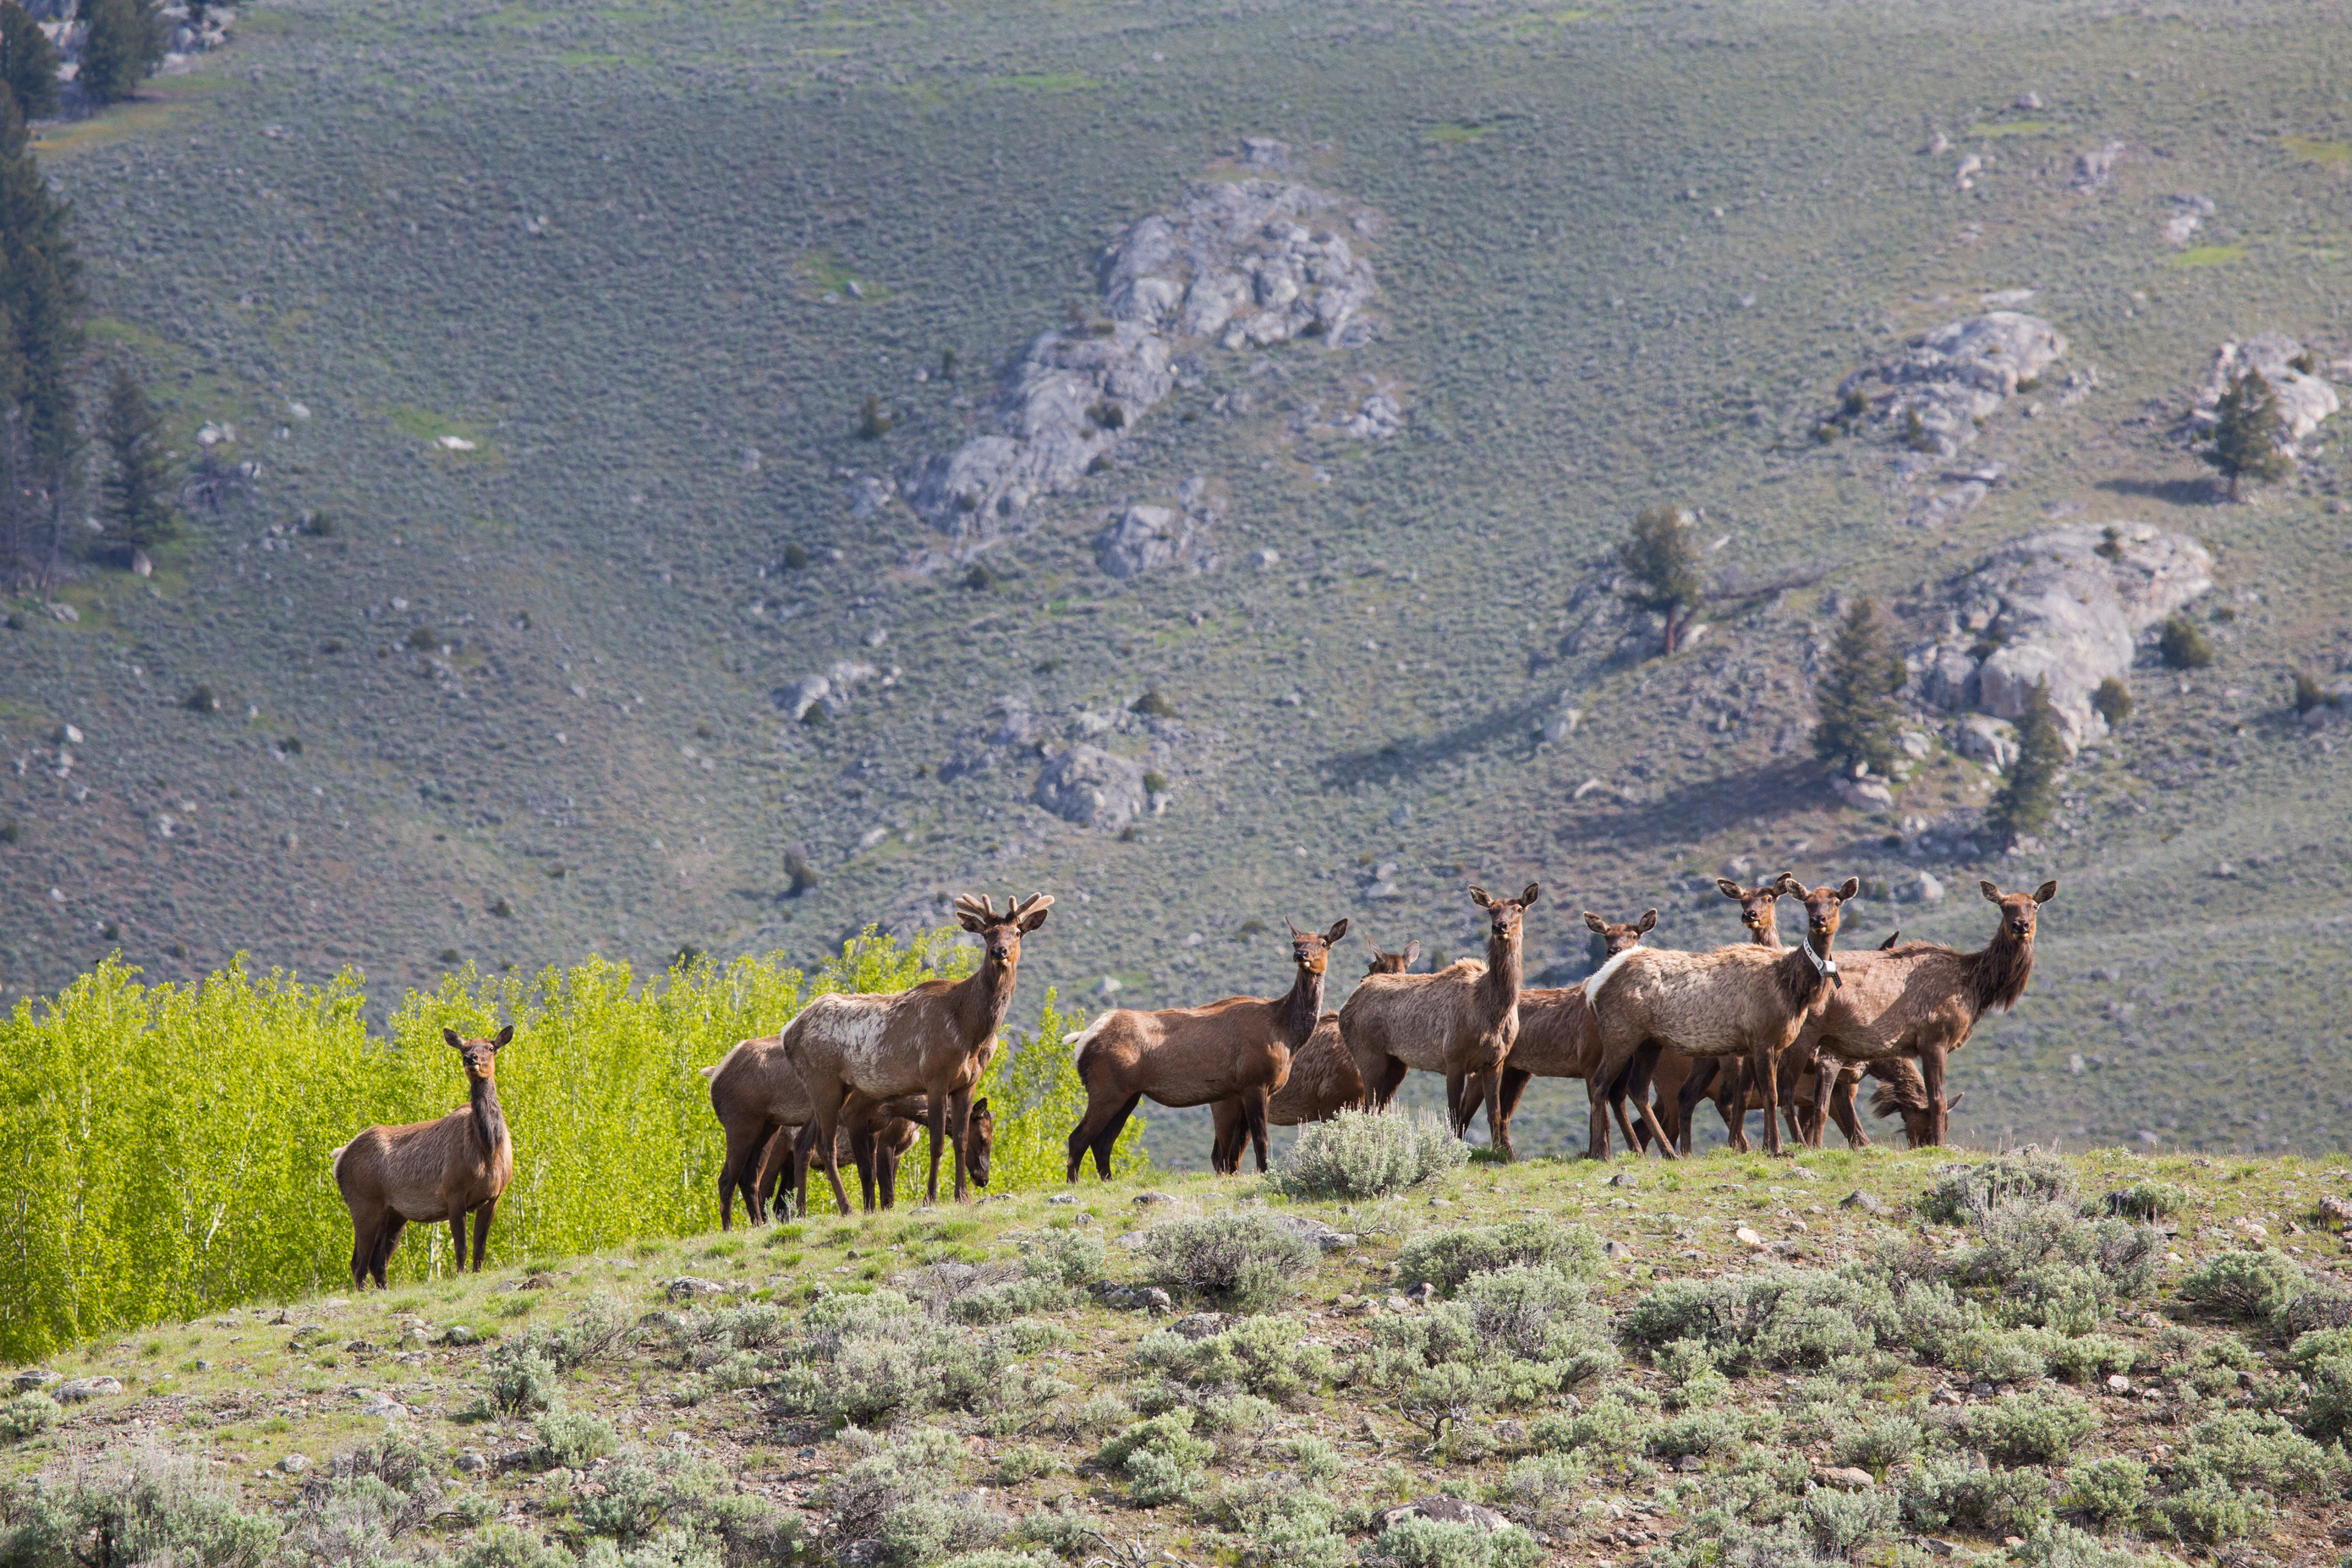 A small herd of elk stand on a hill with newly leafed out trees in the background.